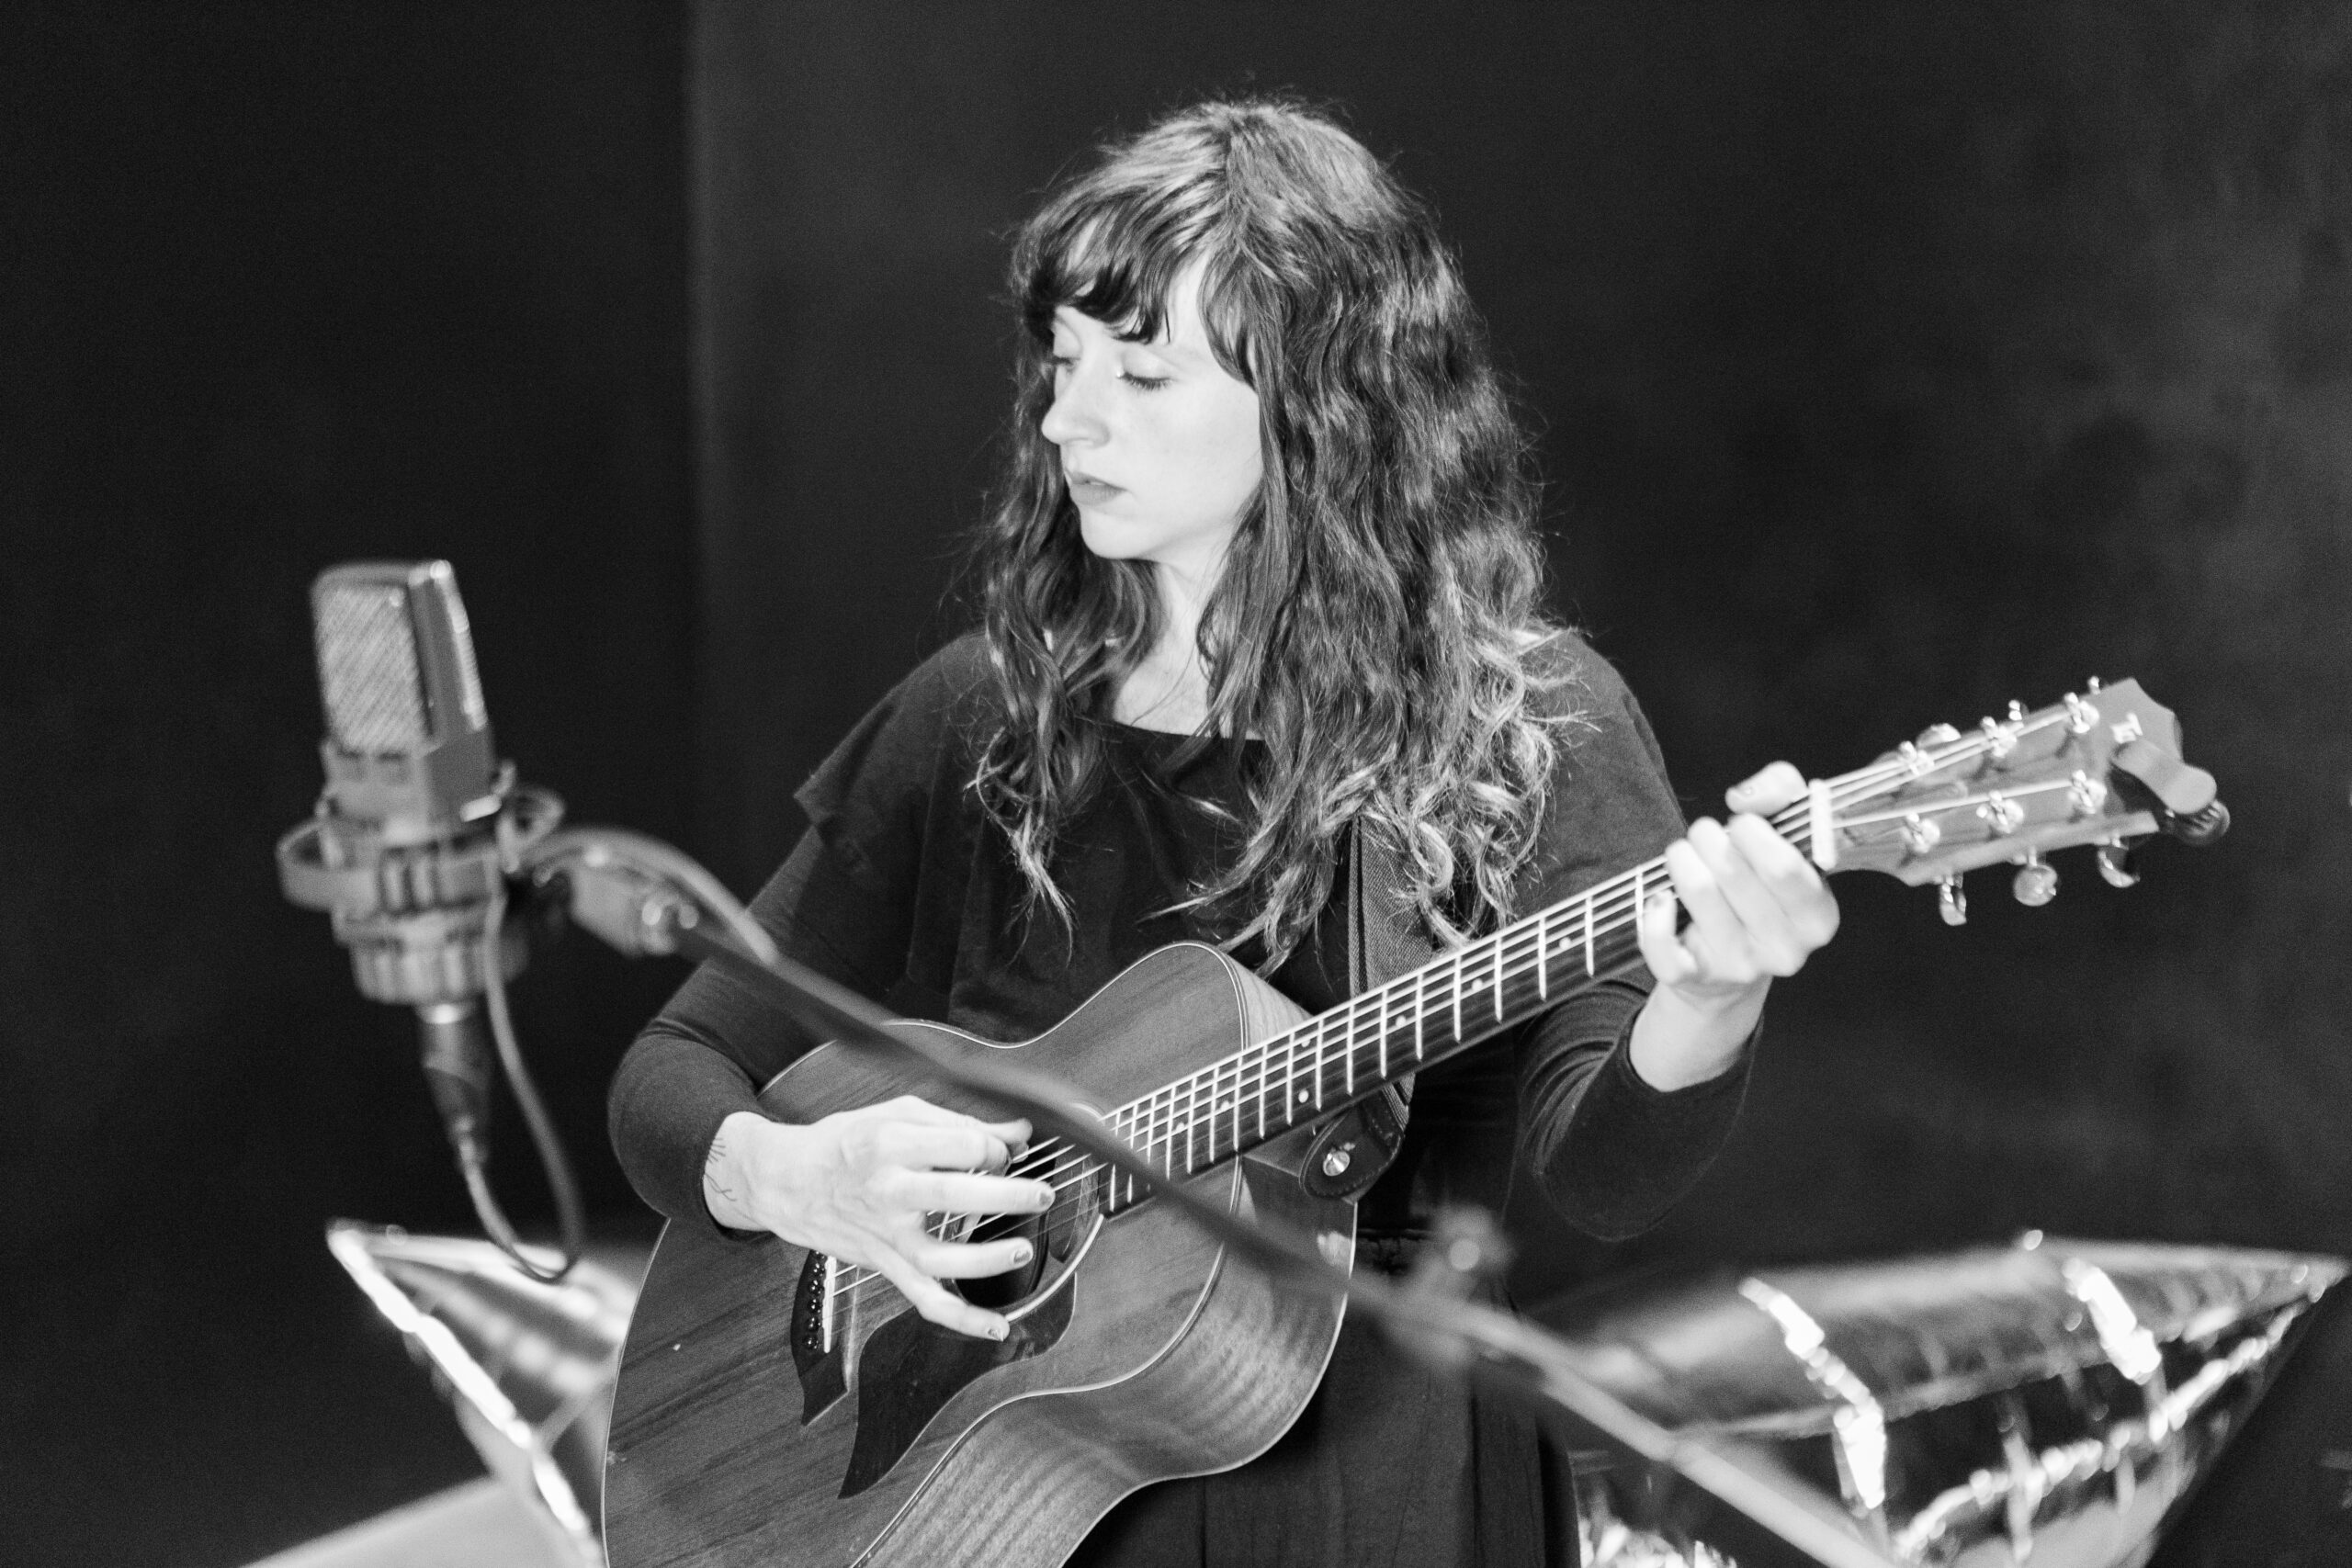 Woman playing guitar in the foreground of a studio session.